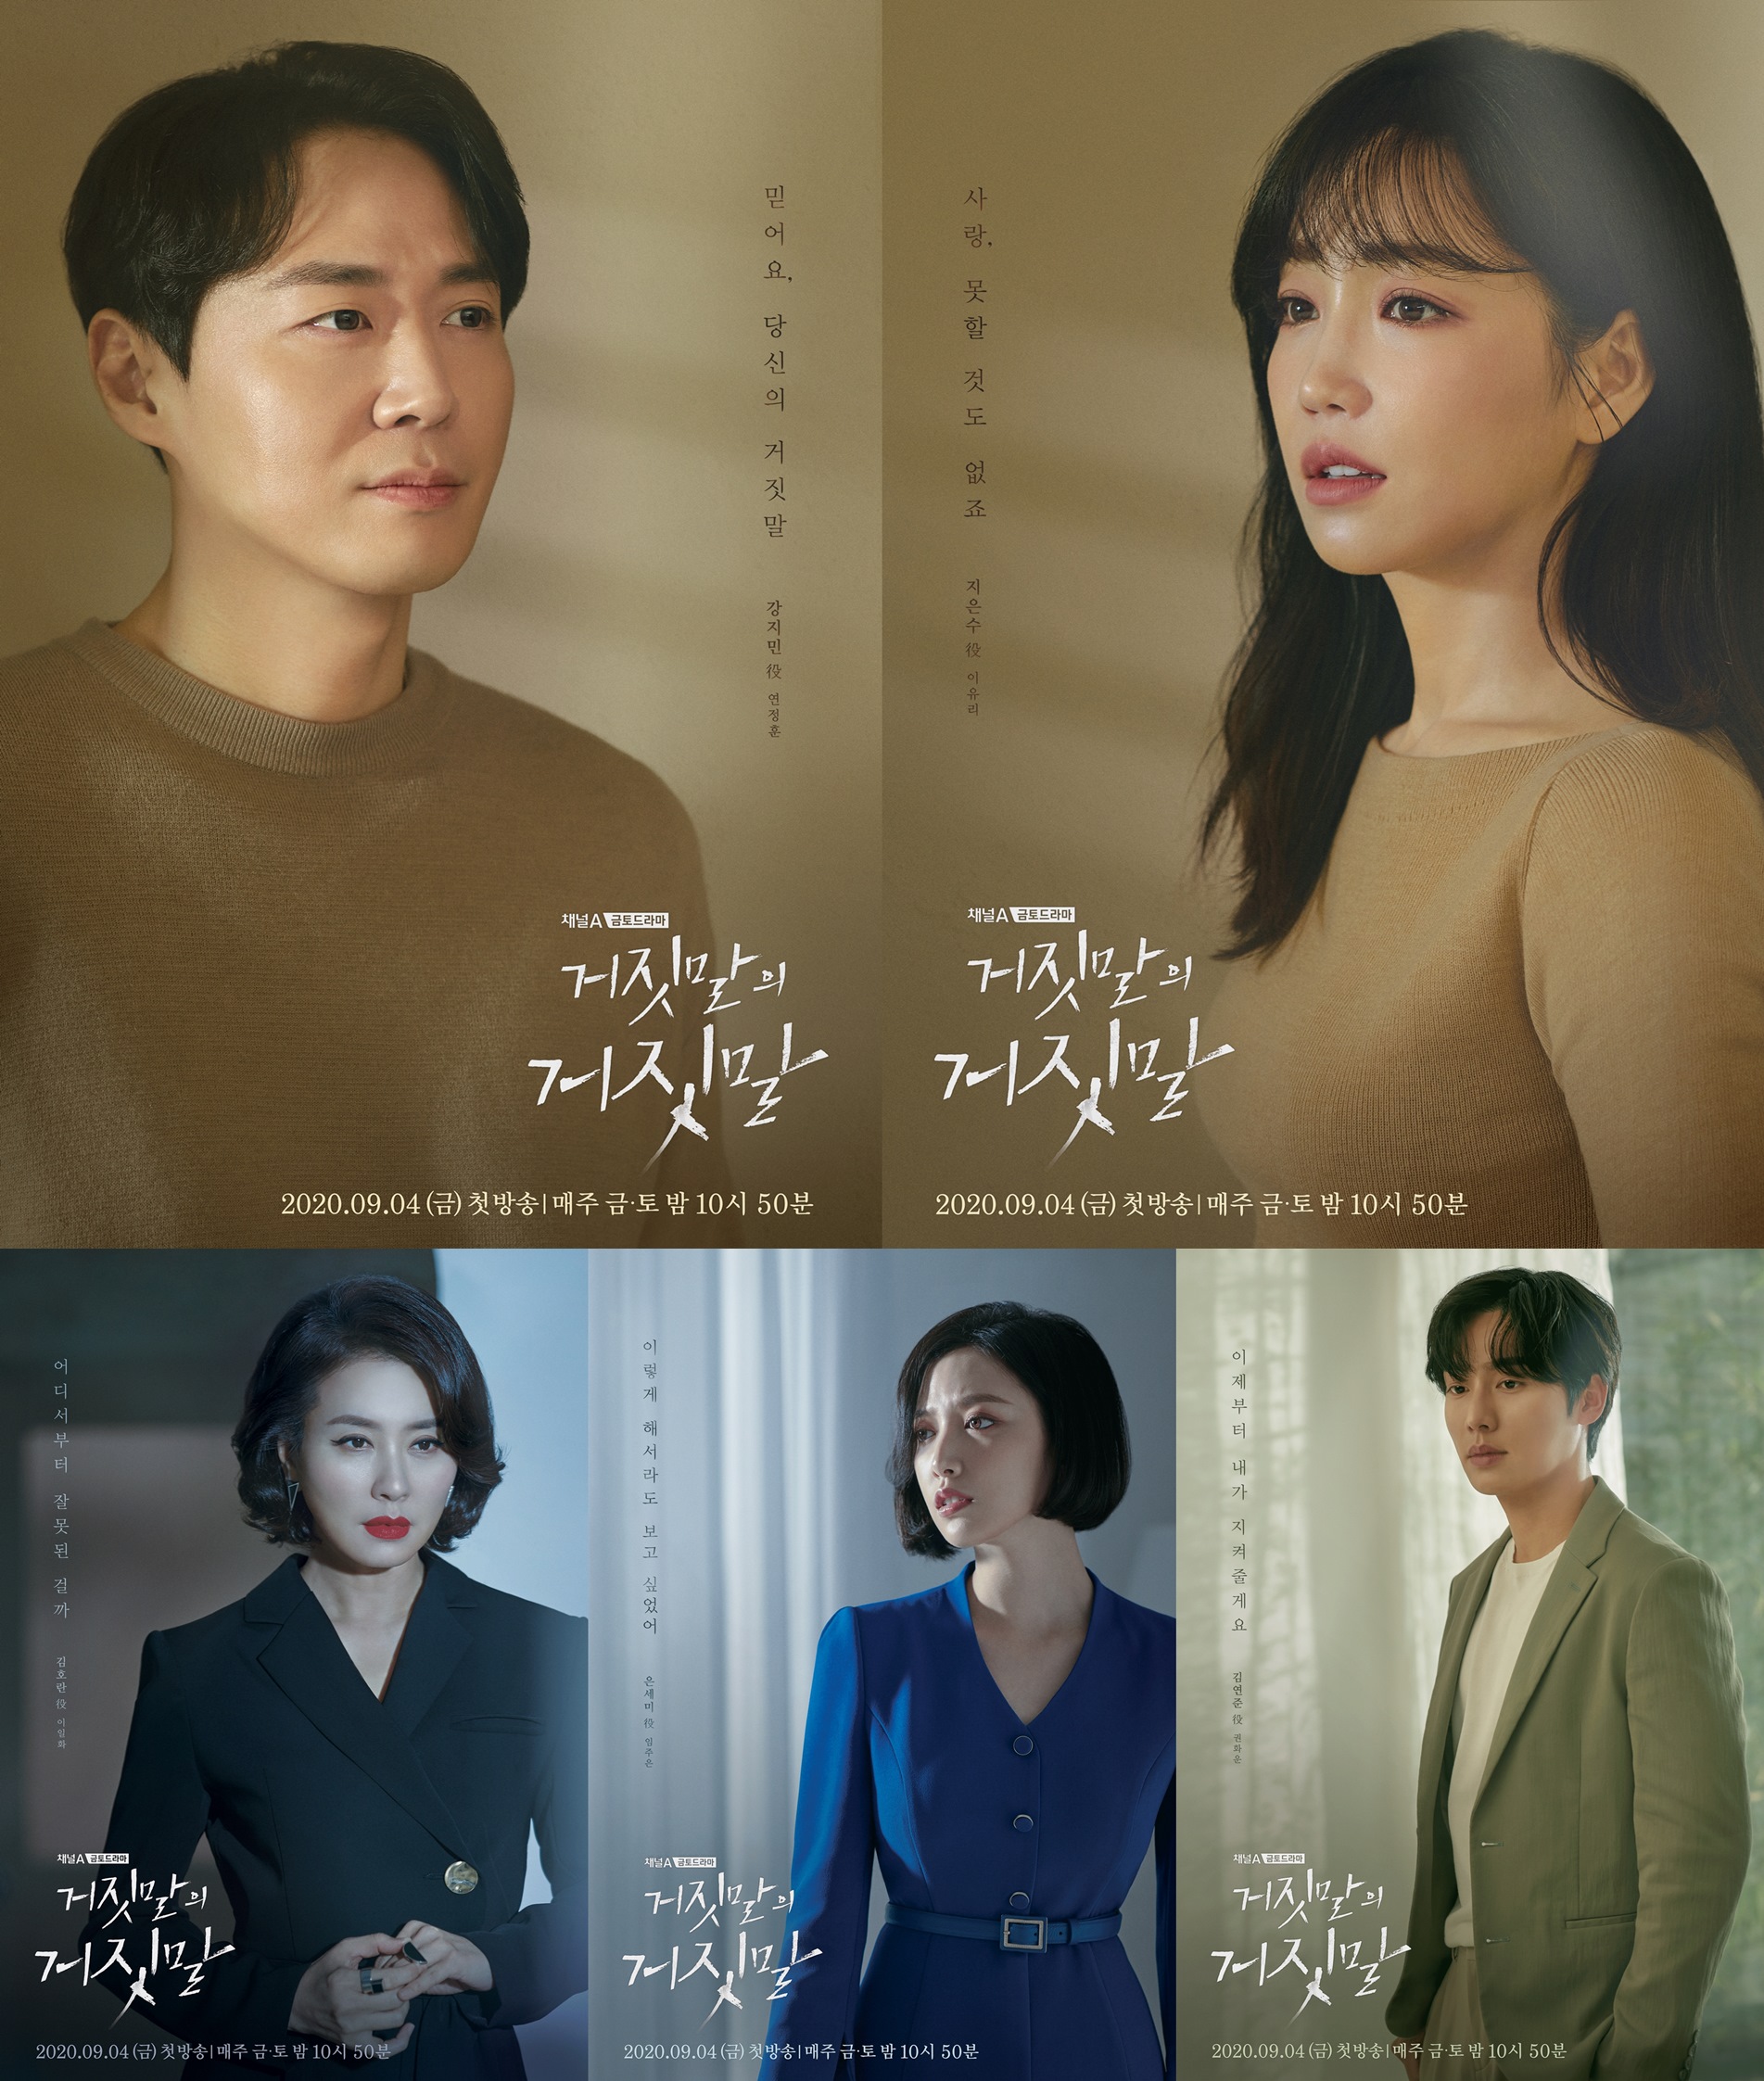 Teaser trailer 2 & character posters for Channel A drama “Lies of Lies